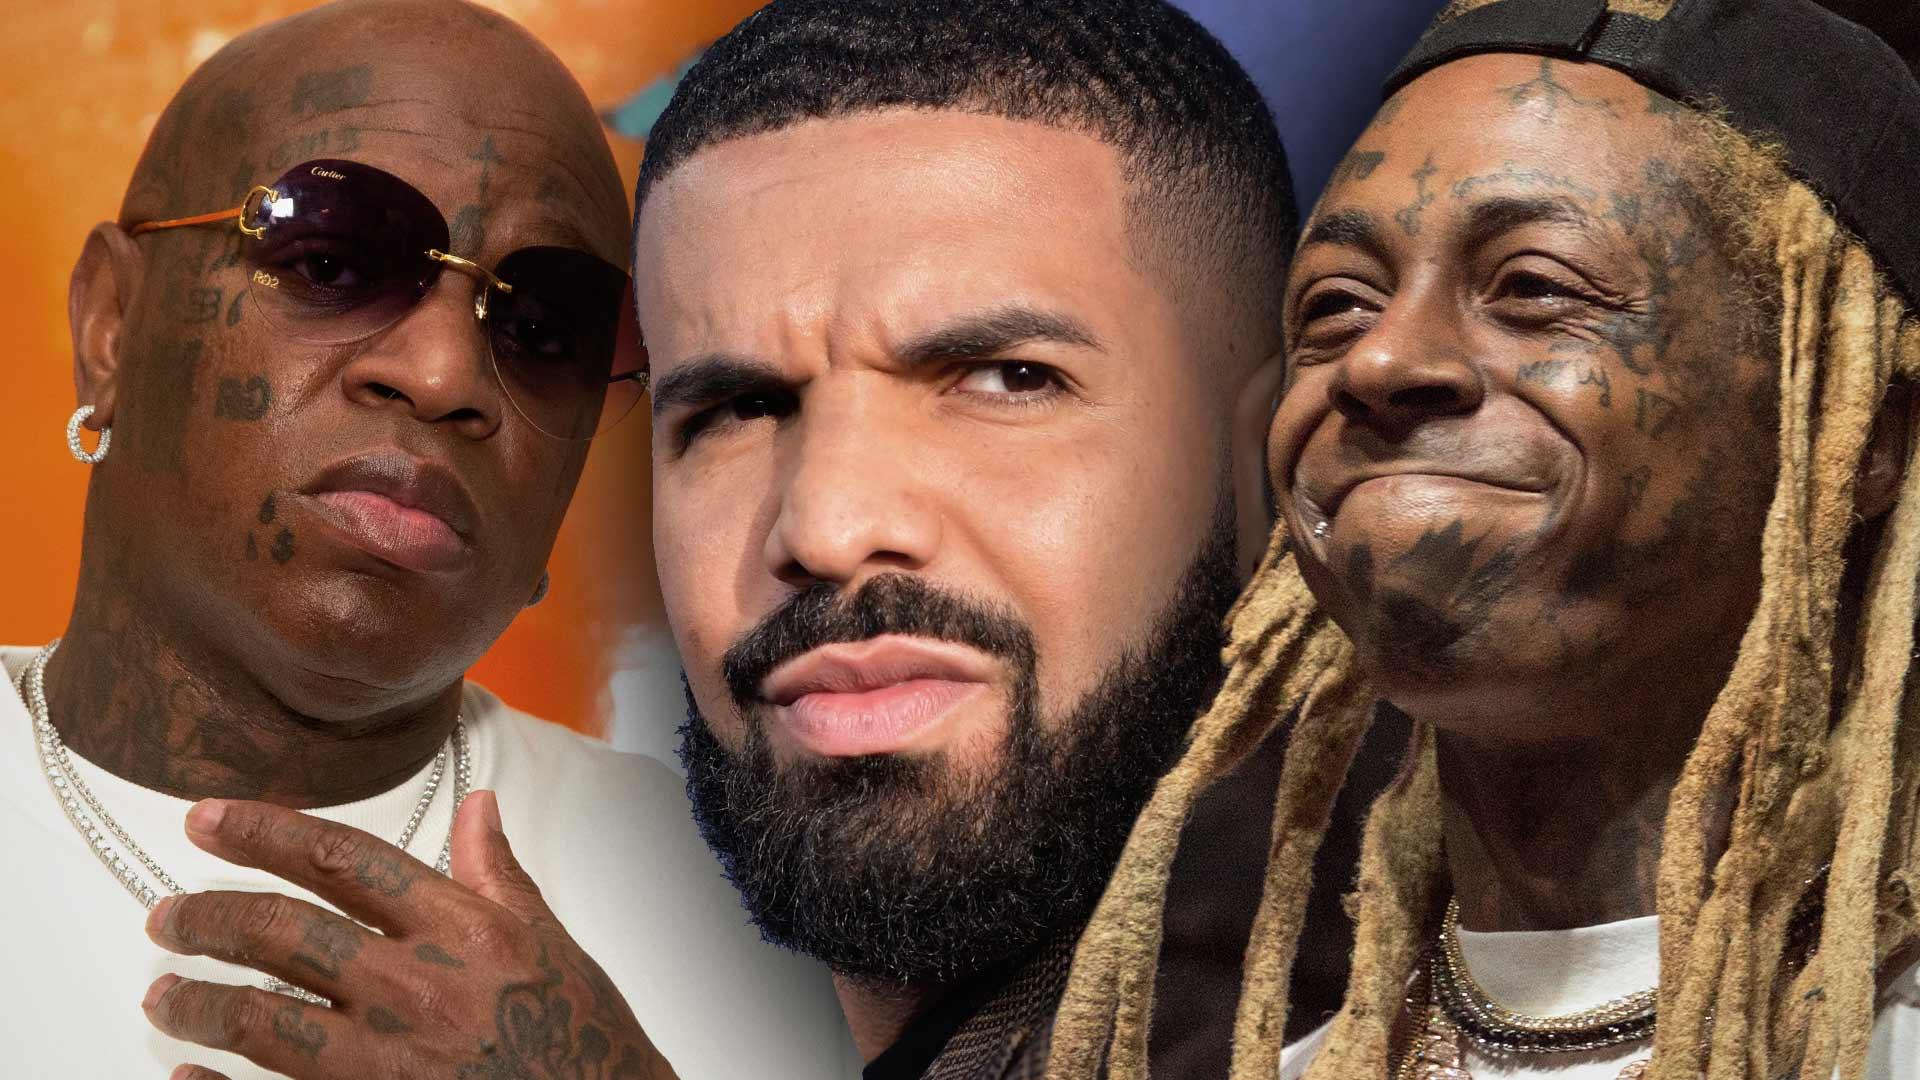 Lil Wayne and Birdman End Years-Long Legal Battle Over Drake’s Royalties